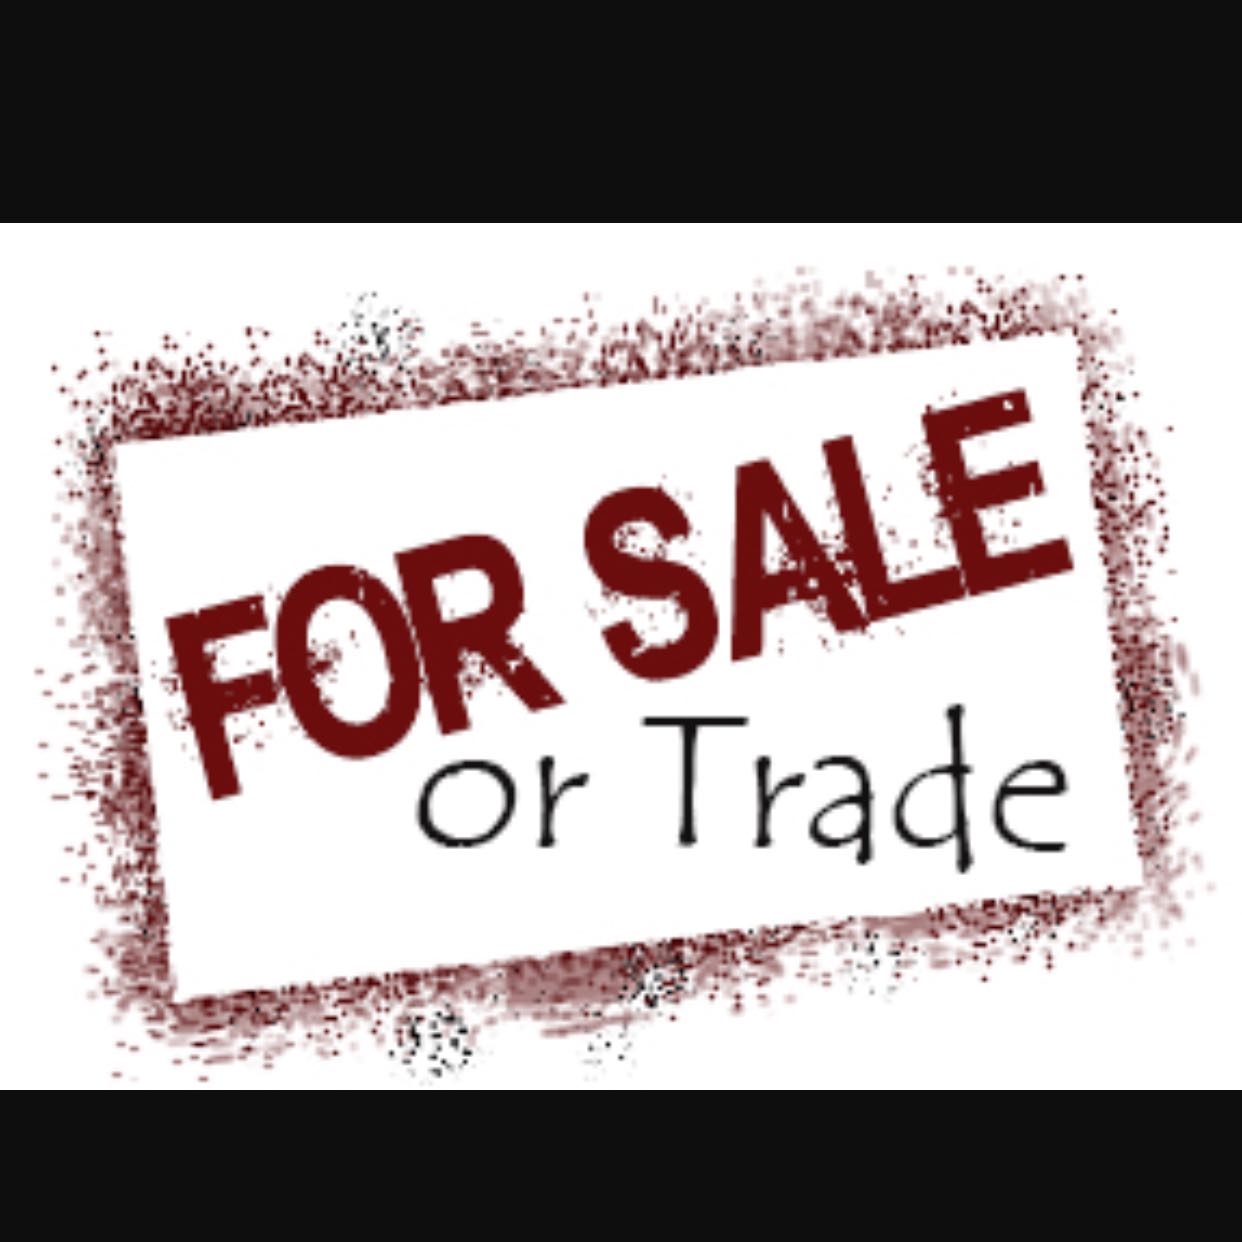 Trade sale. Page for sale. Trade sales